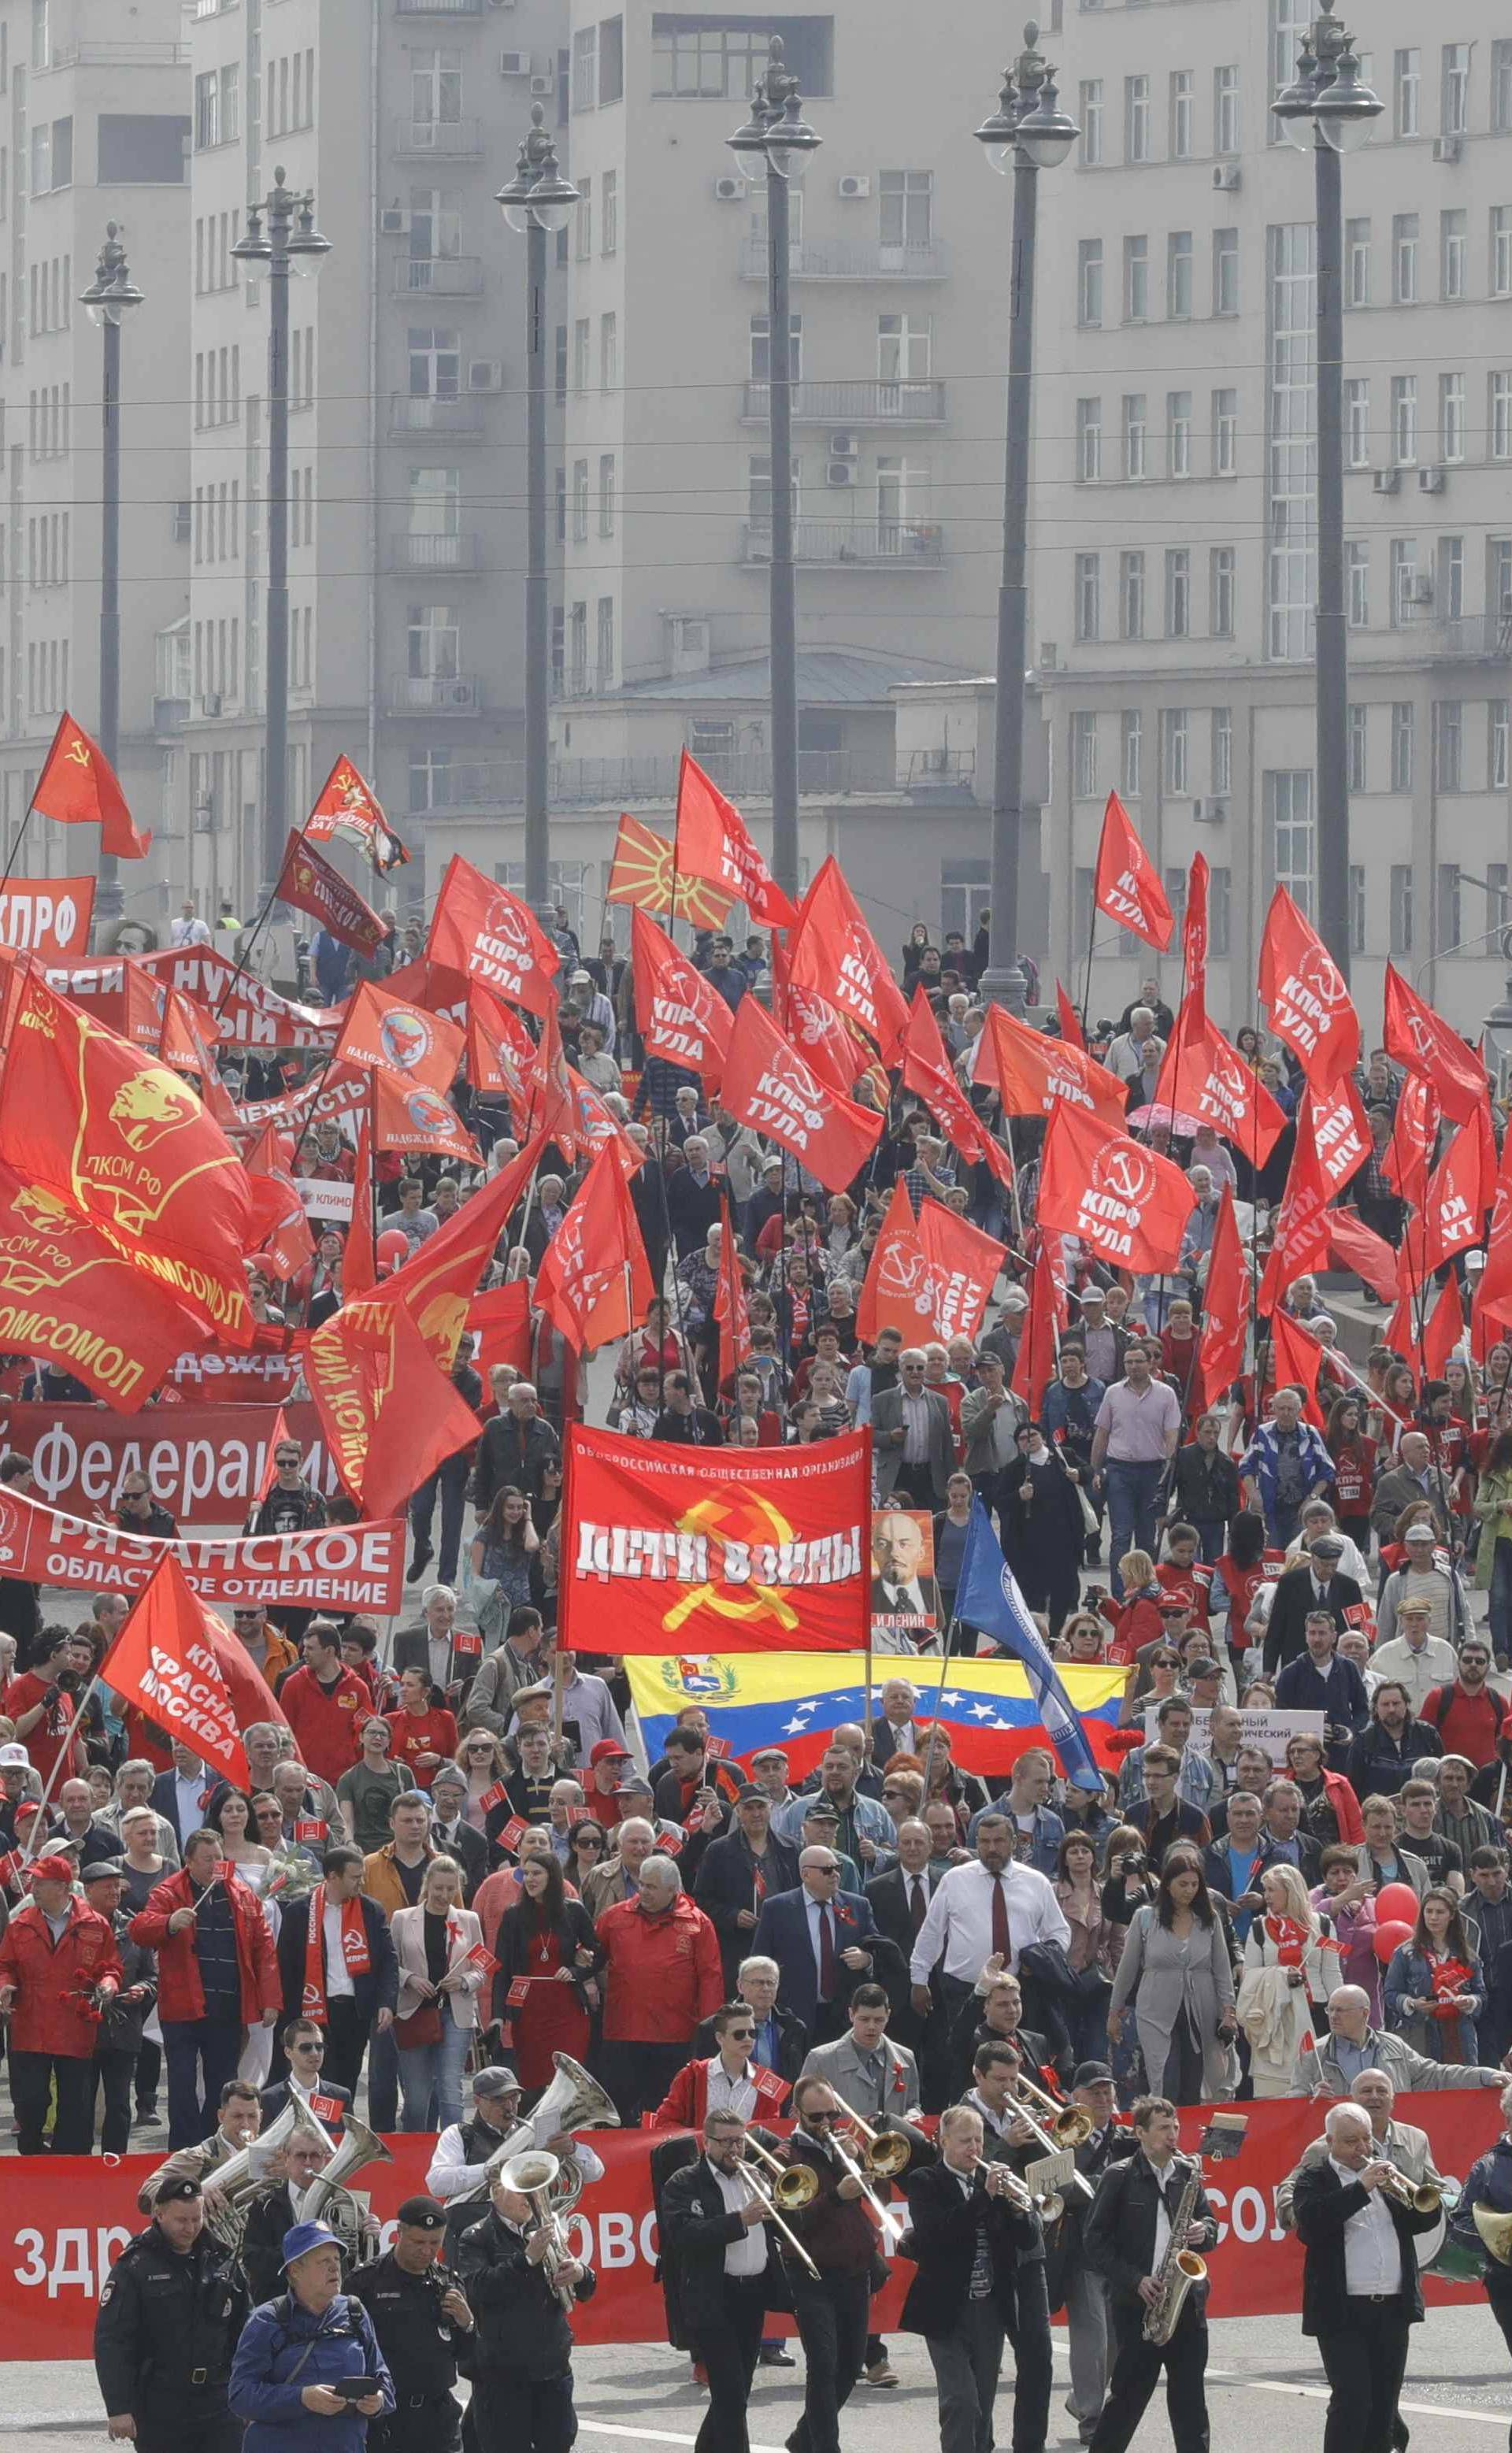 Supporters of left-wing political parties and movements attend a May Day rally in central Moscow